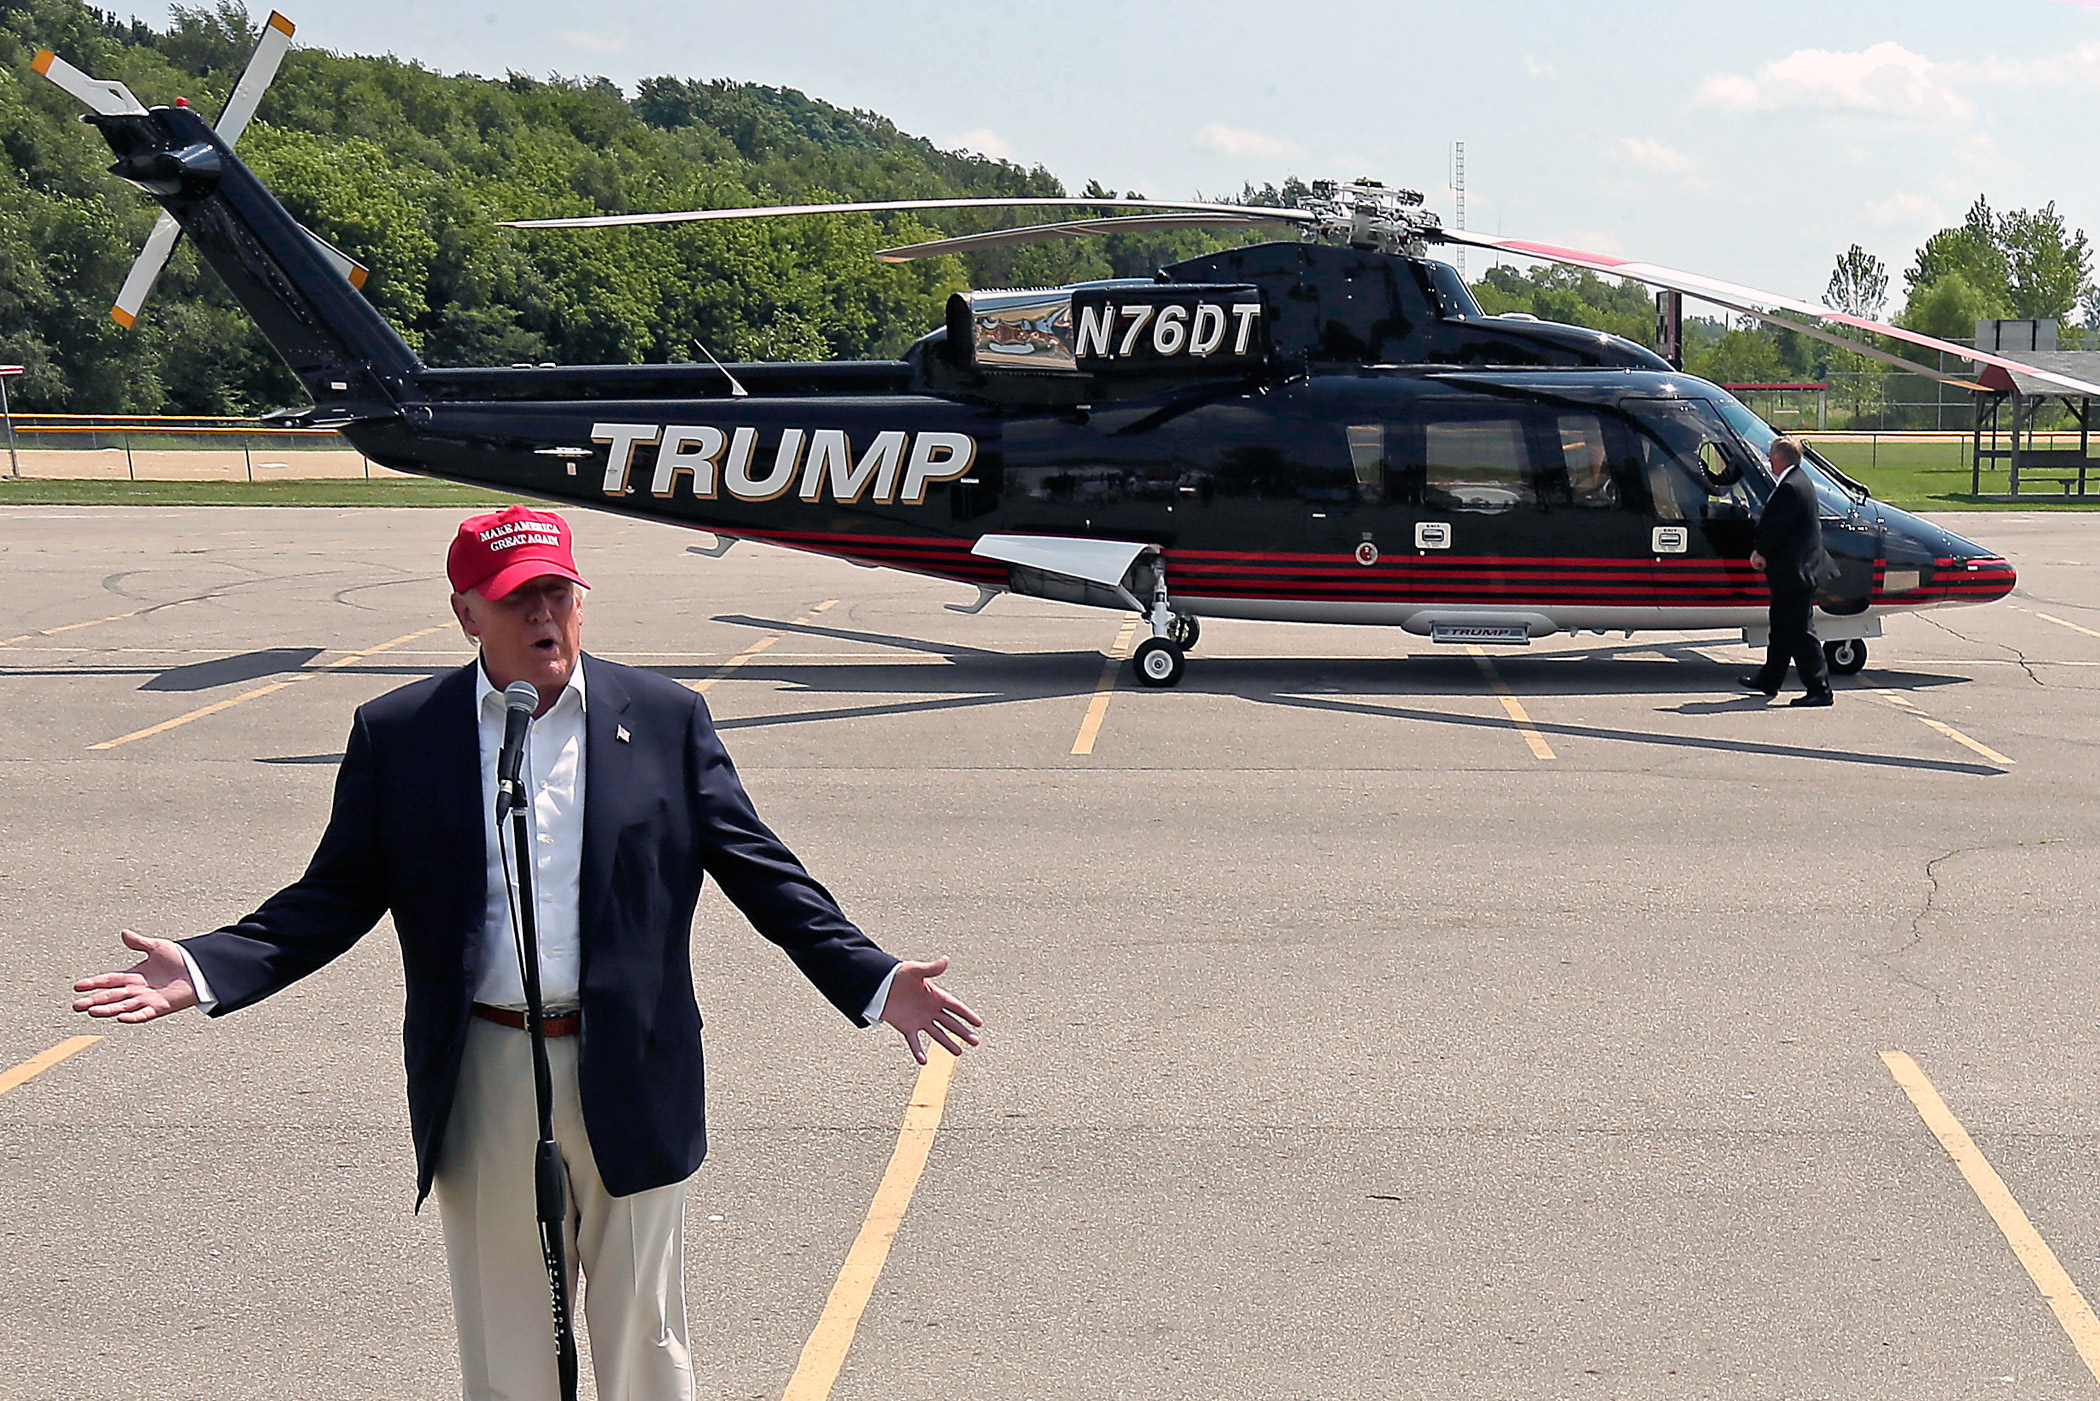 Republican presidential candidate Donald Trump speaks near his helicopter at the Iowa State Fair on Aug. 15, 2015, in Des Moines.